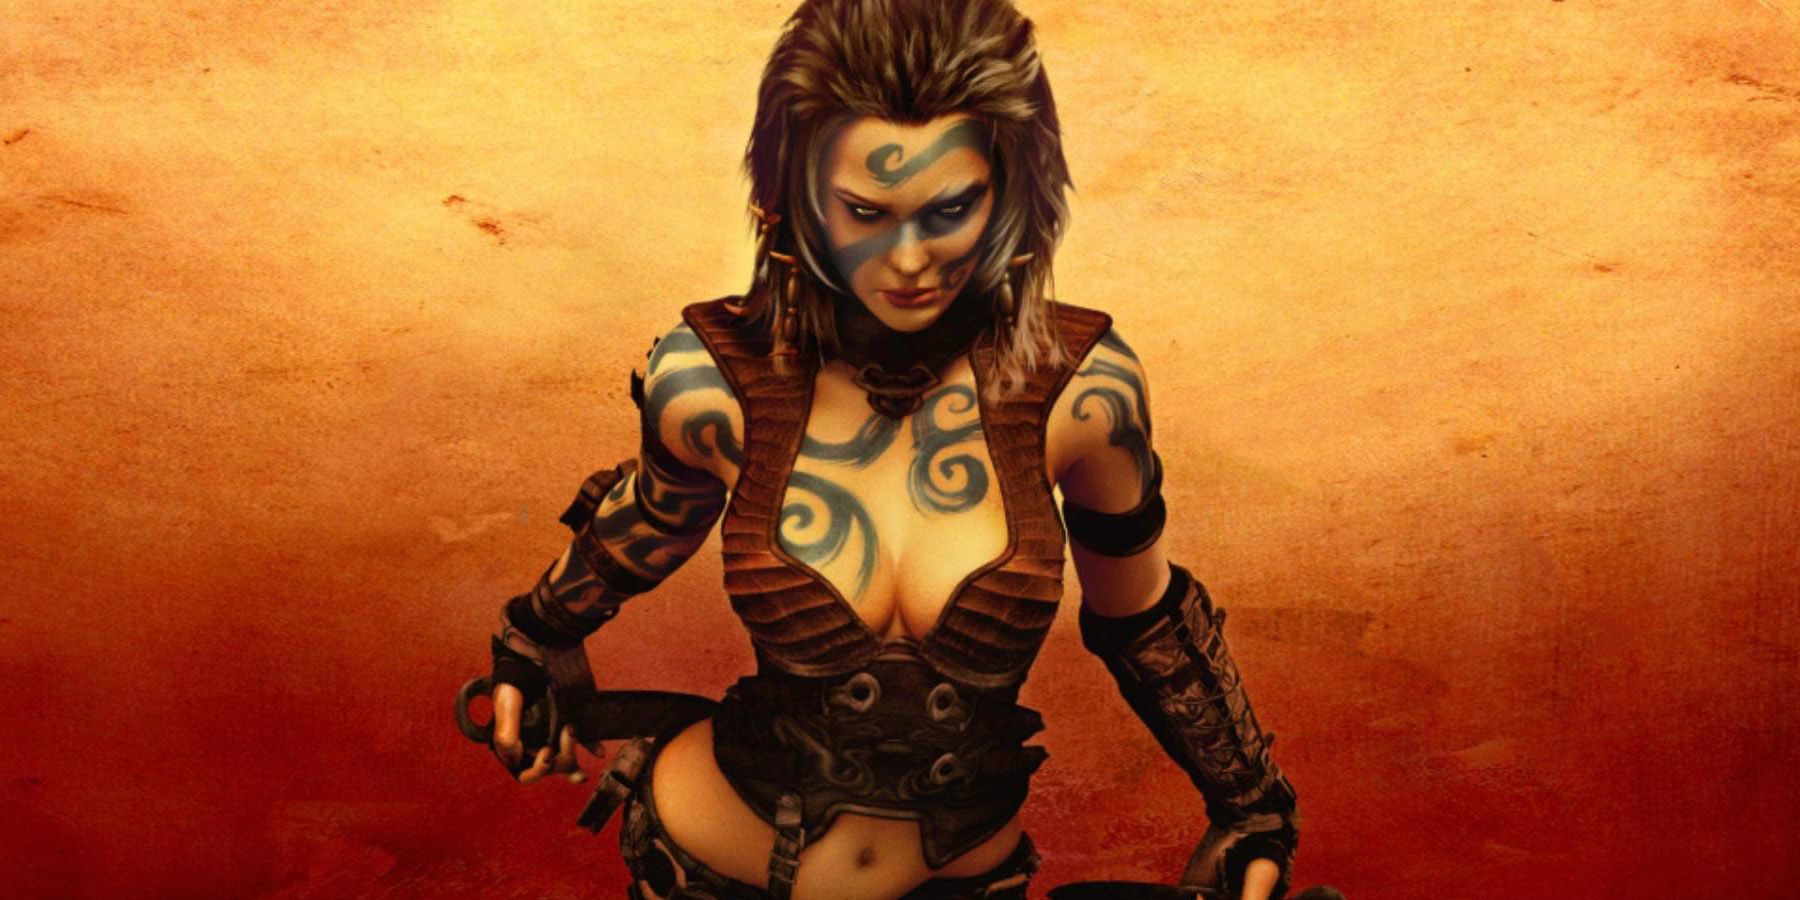 A woman with tattoos on her body wielding a knife and looking at the camera. The background looks like a desert.